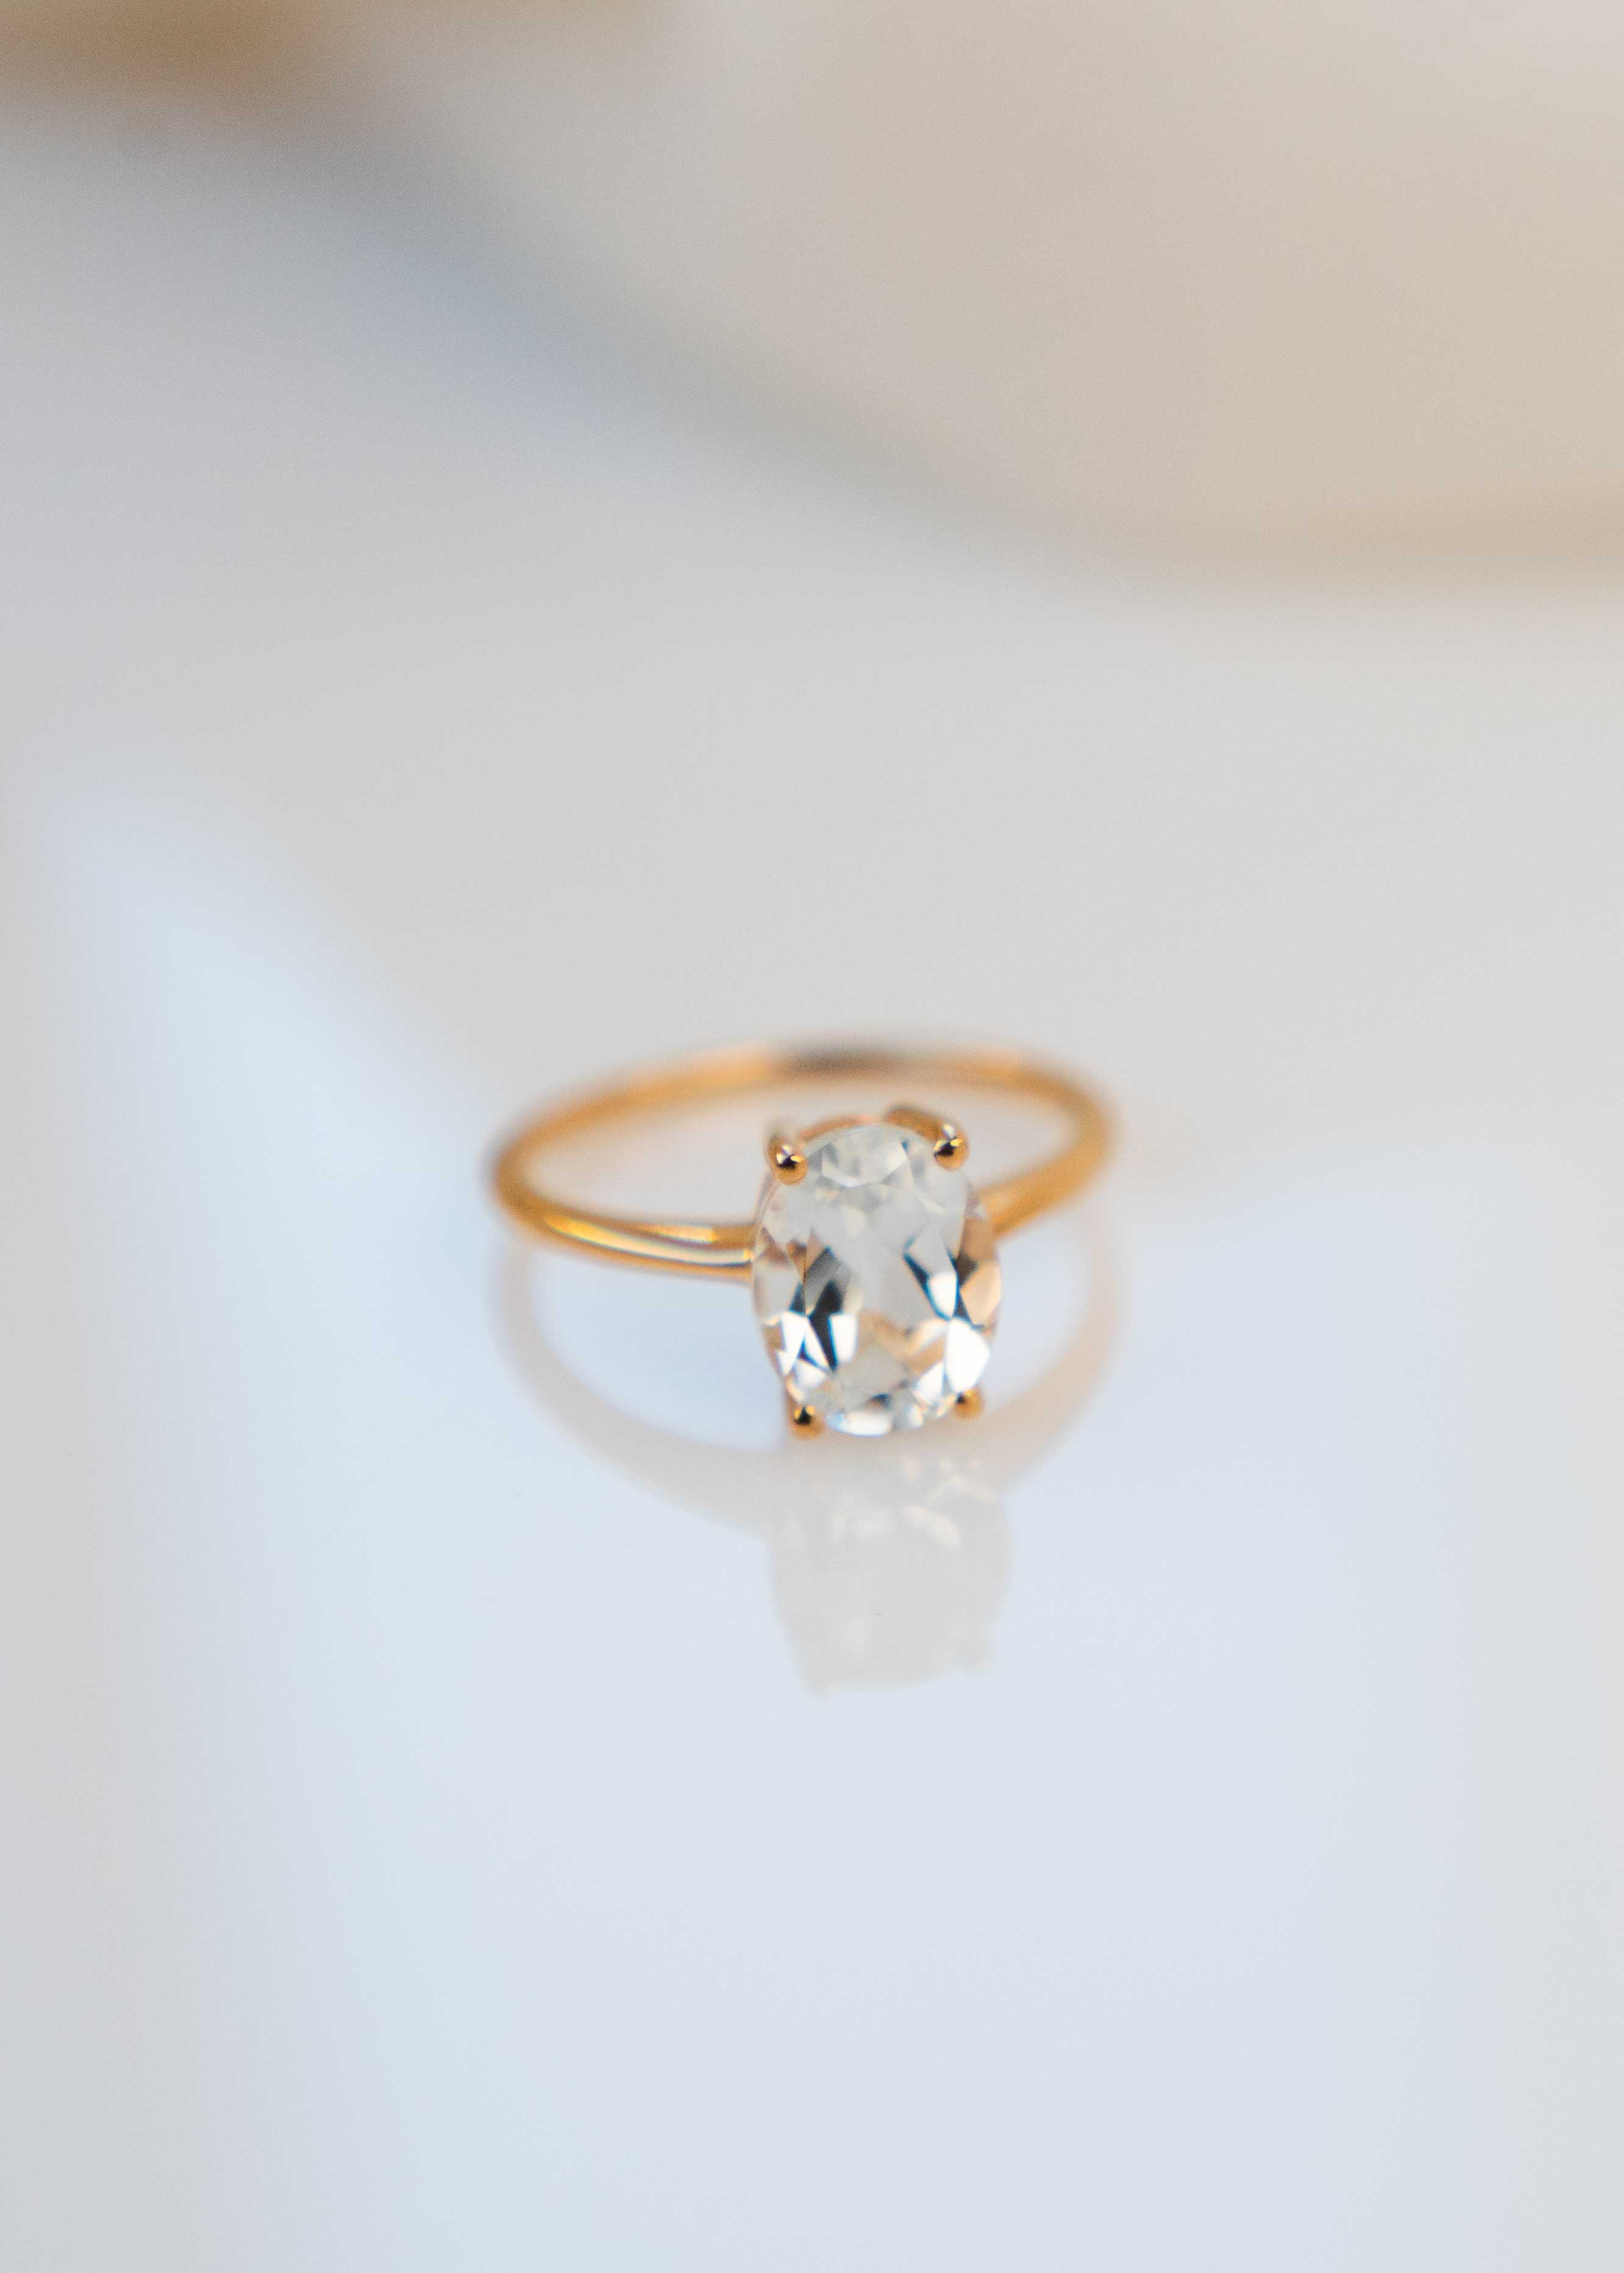 Genuine White Topaz Ring, Oval Solitaire Gold Promise Ring, alternative wedding rings for her, April Birthstone, Gifts for Her